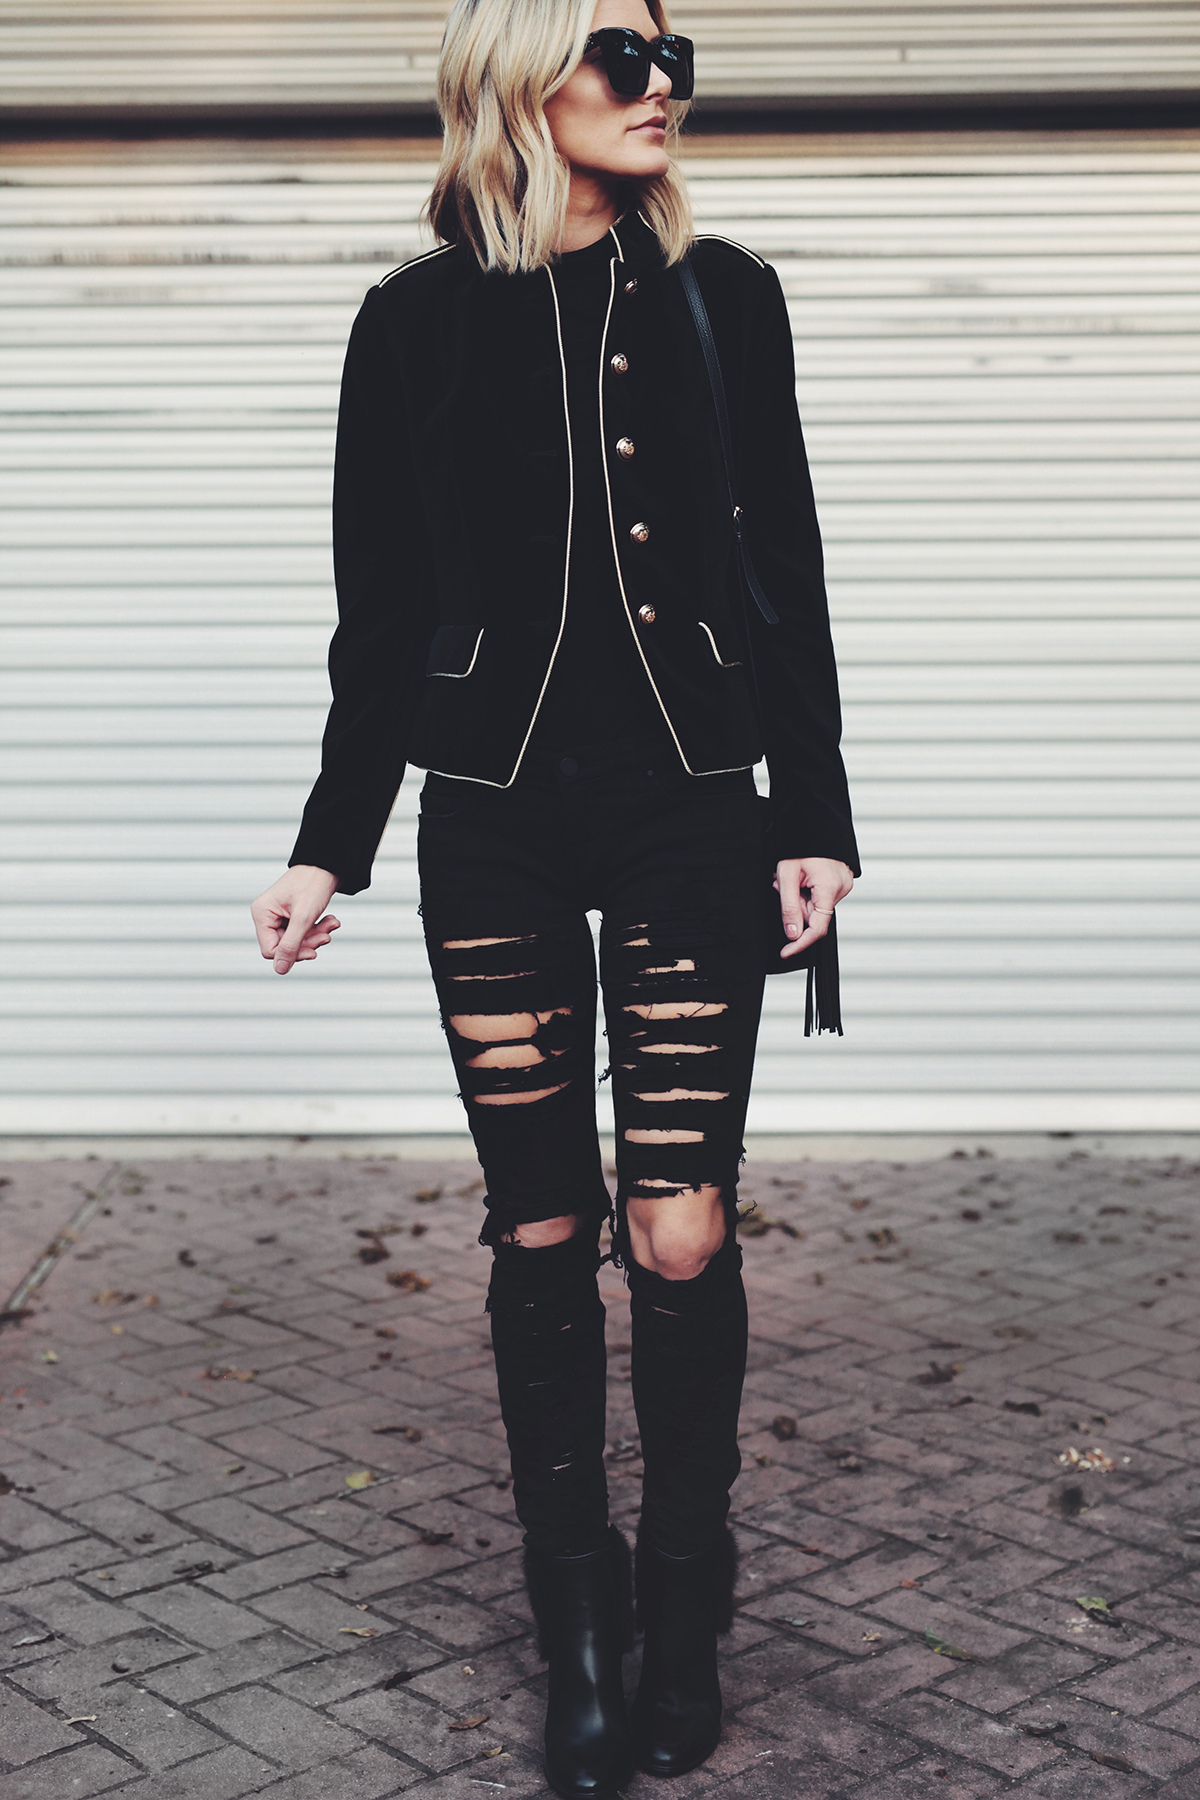 velvet blazer with ripped jeans outfit